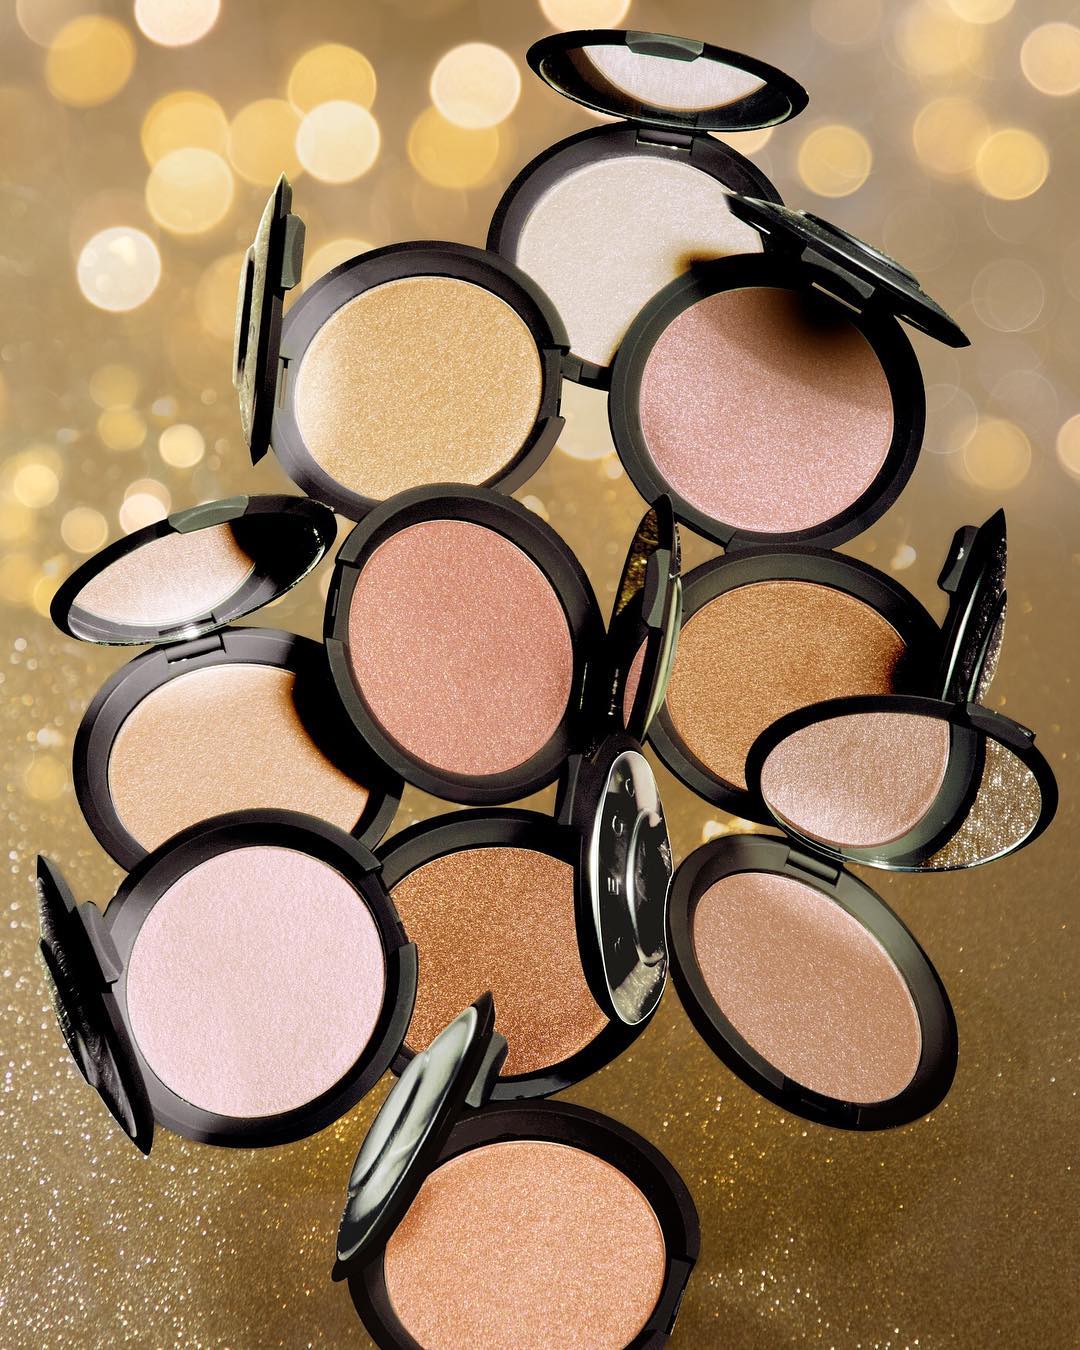 BECCA Shimmering Skin Perfector Pressed Ambient